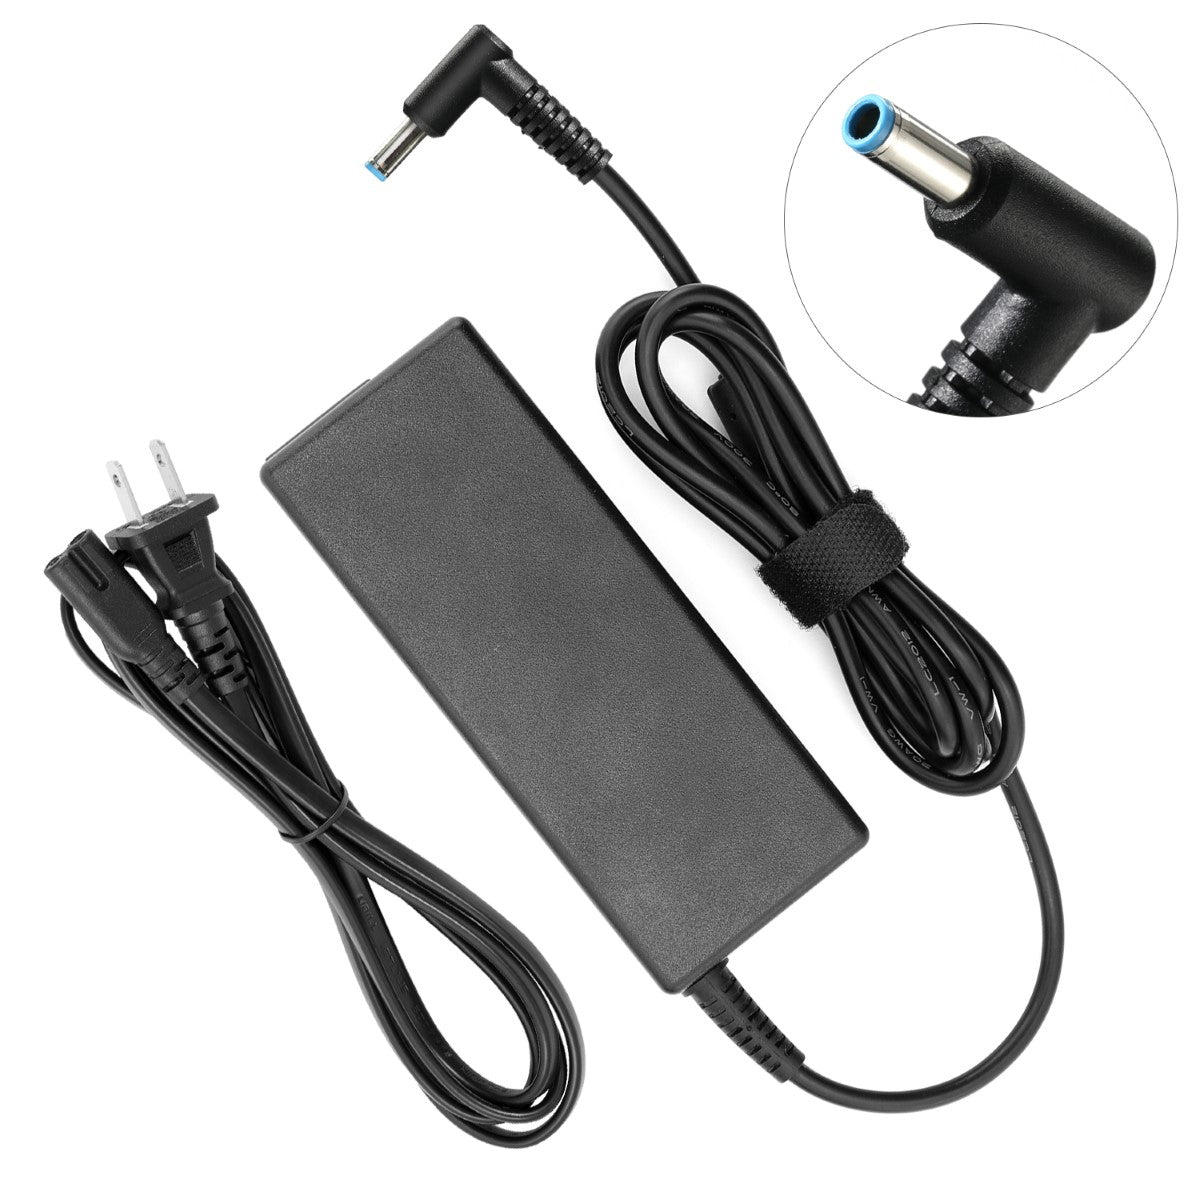 AC Adapter Charger for HP Spectre 13-4001dx Notebook.